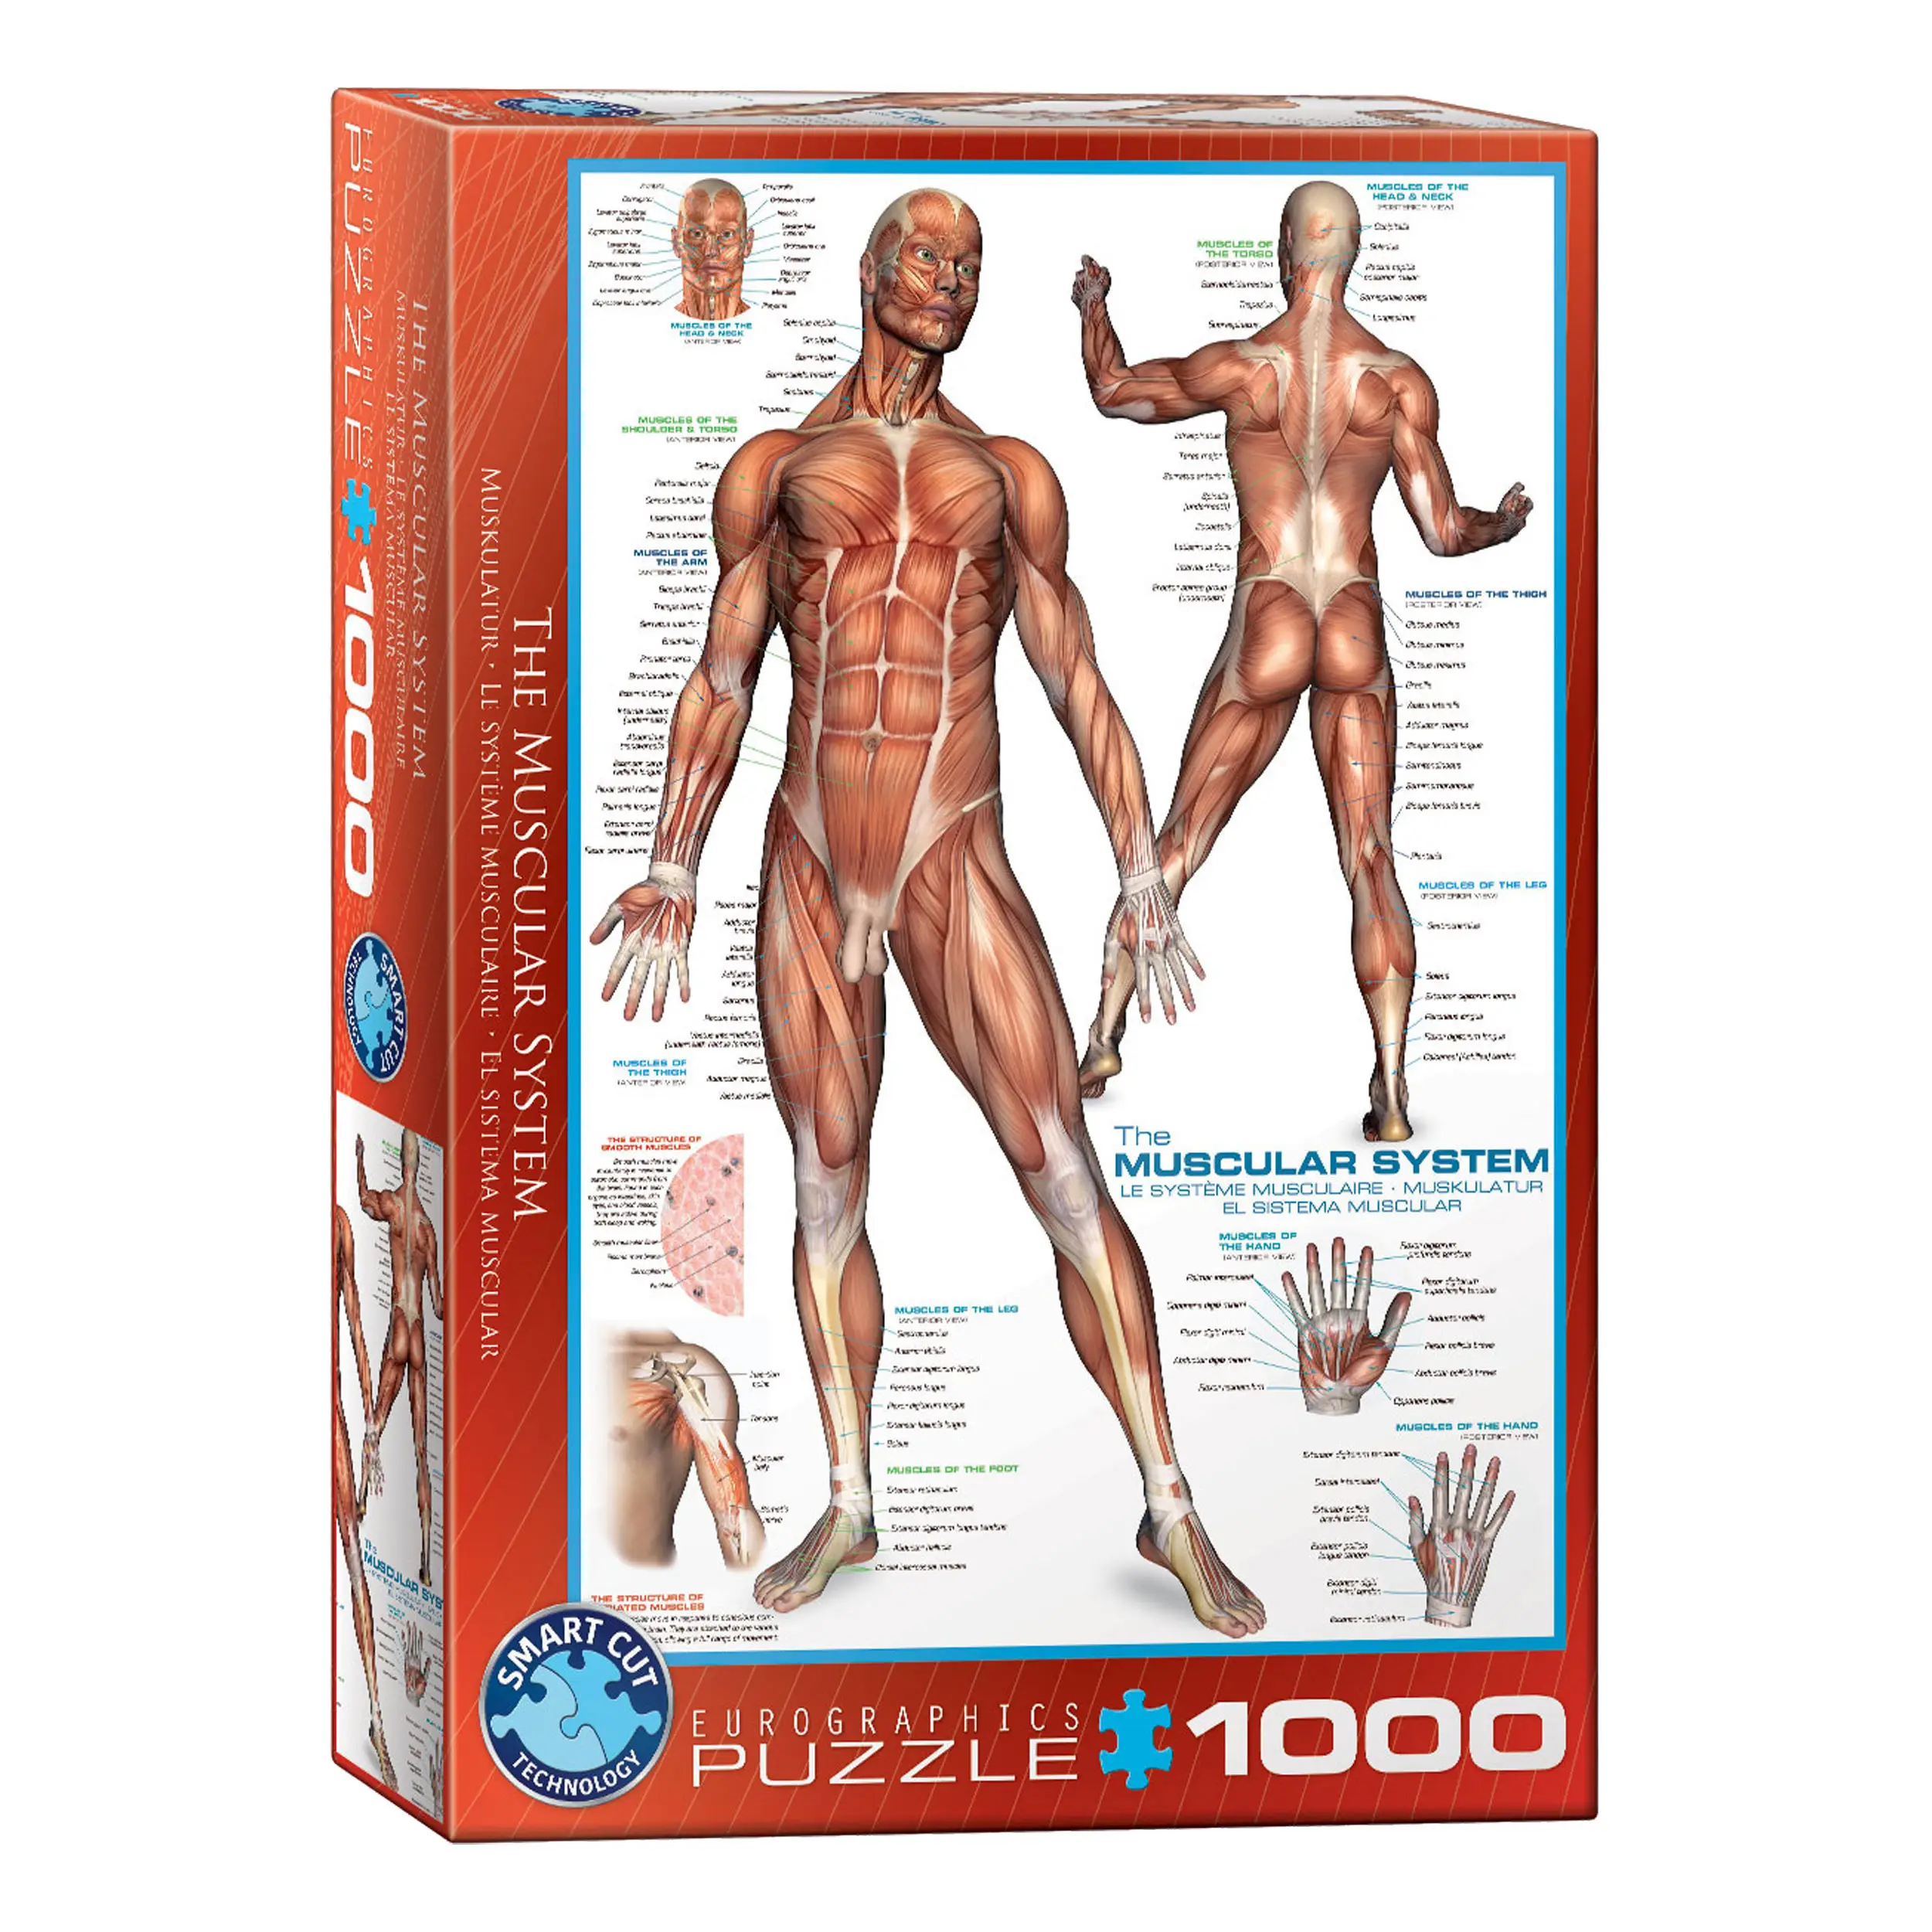 Puzzle Muskelsystem 1000 Teile